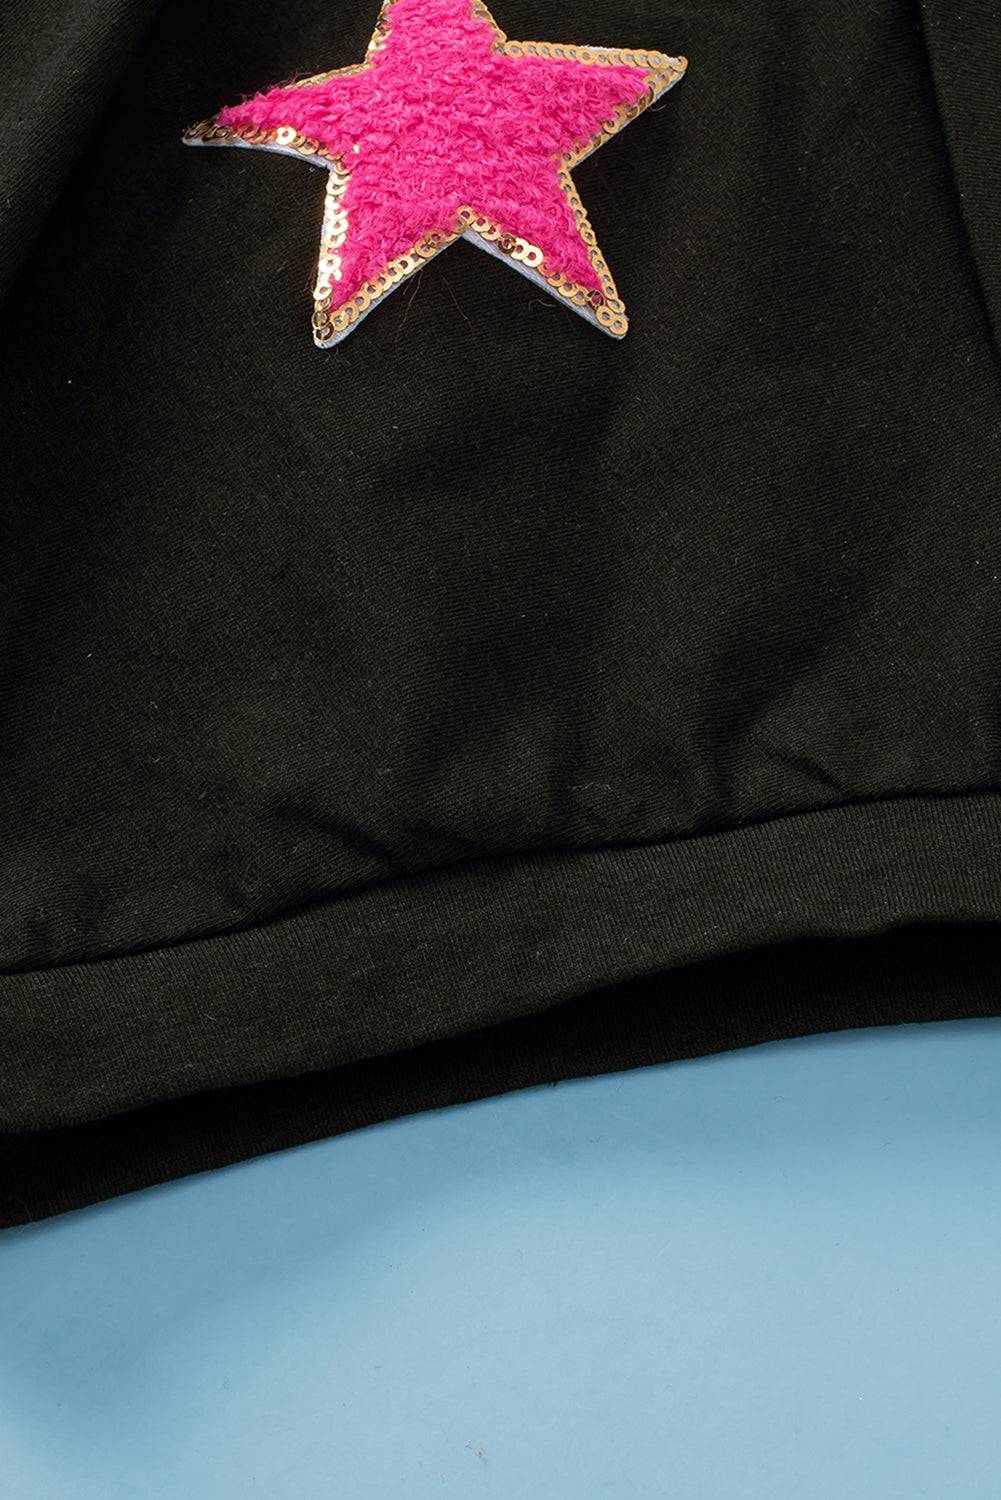 a black jacket with a pink star on it